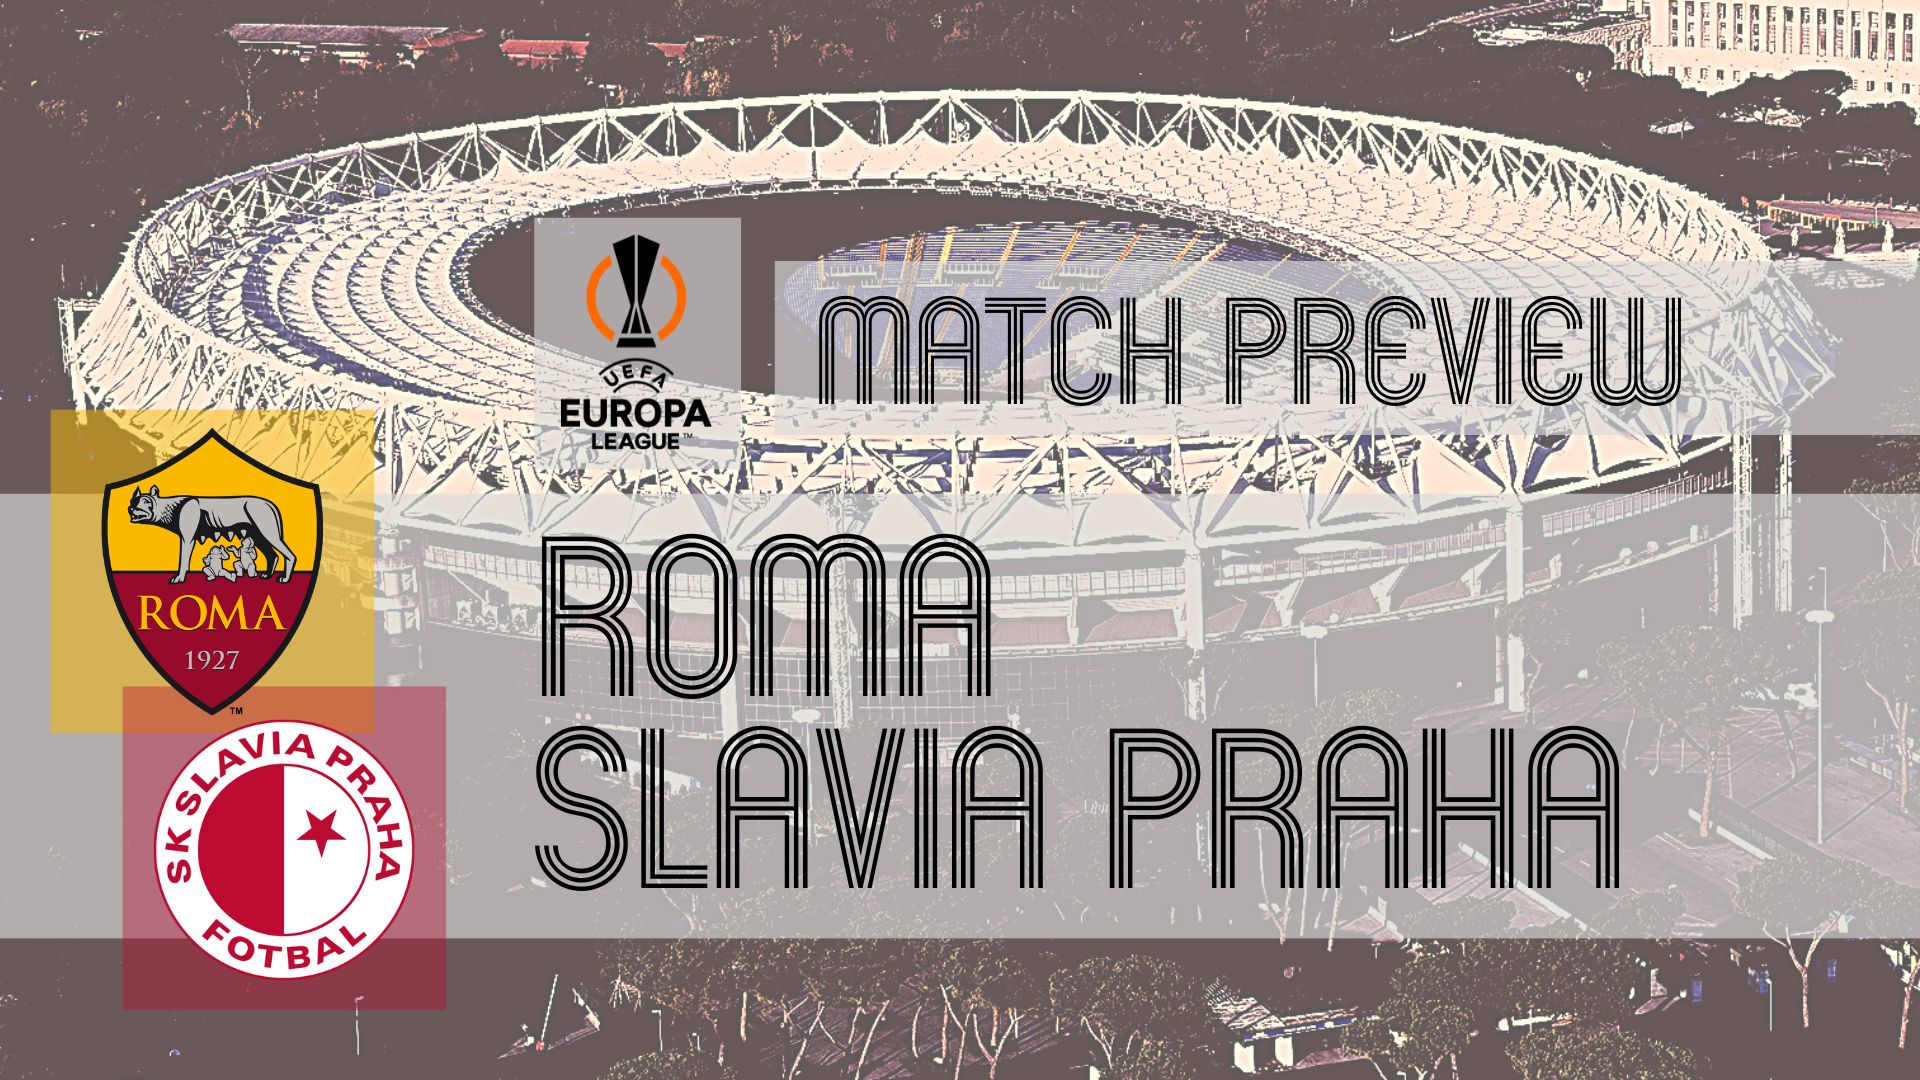 Inter's Champions League Opponents Slavia Prague Are Unbeaten In Last 20  Games